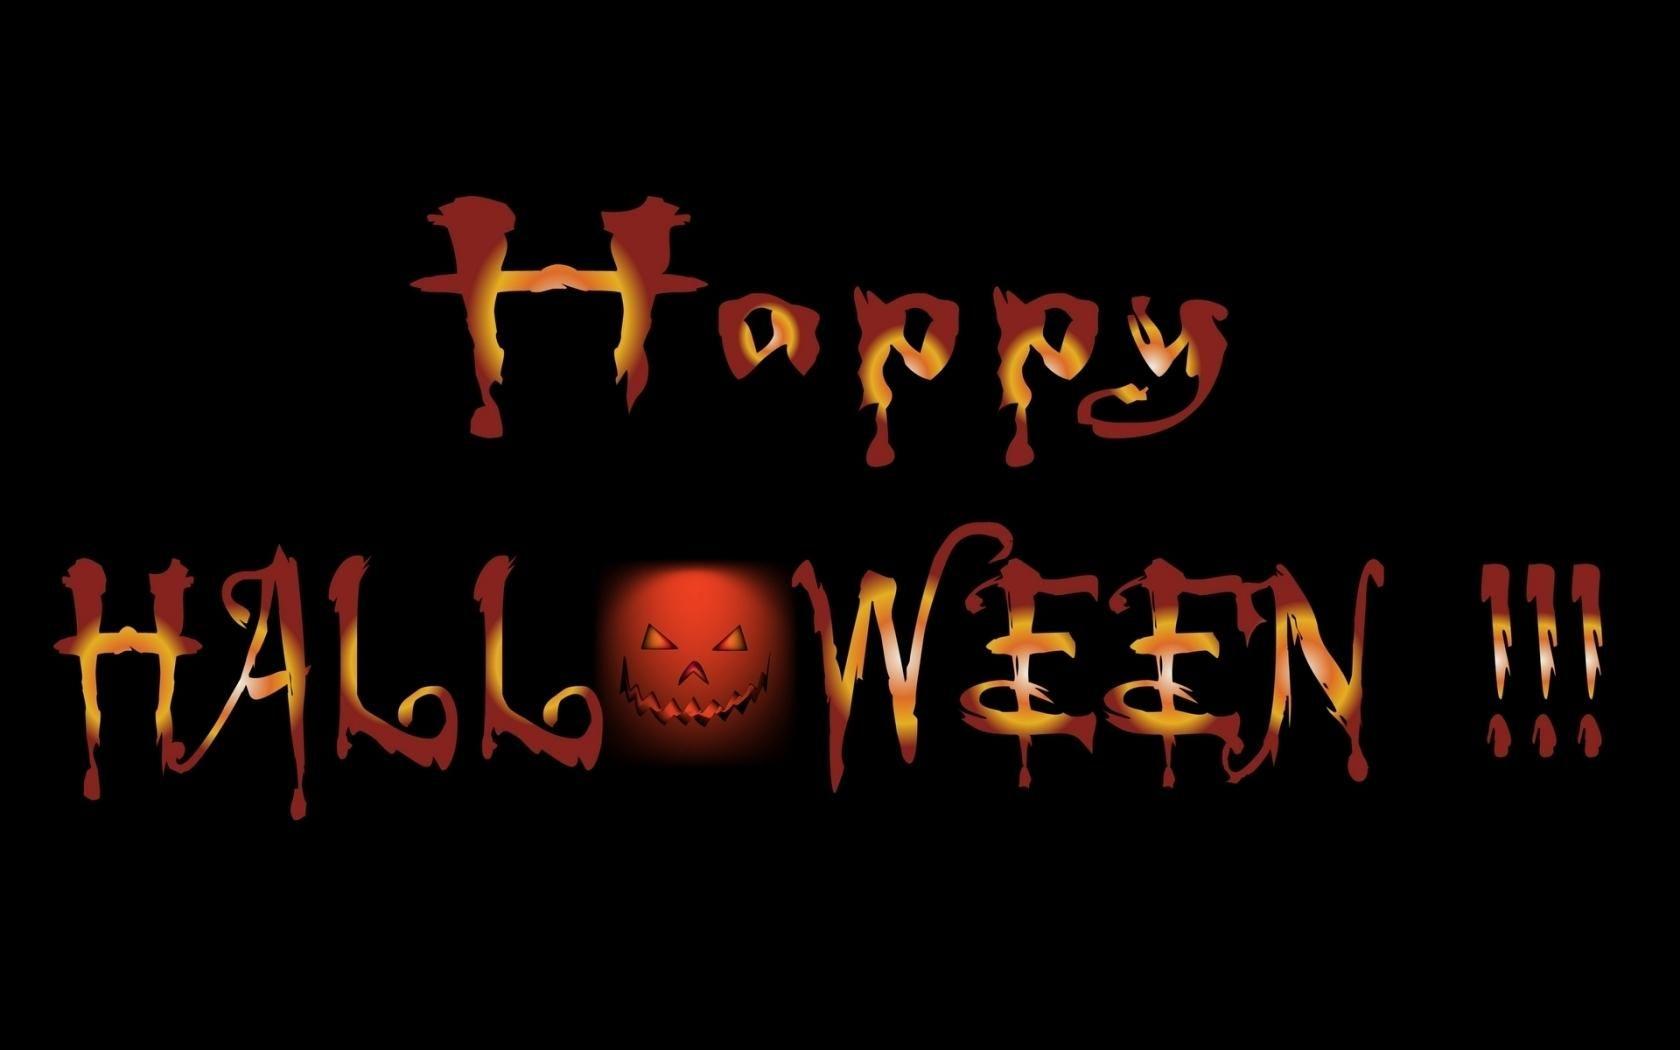 Happy Halloween Day Quotes and Wallpaper. Free Printable Calendar